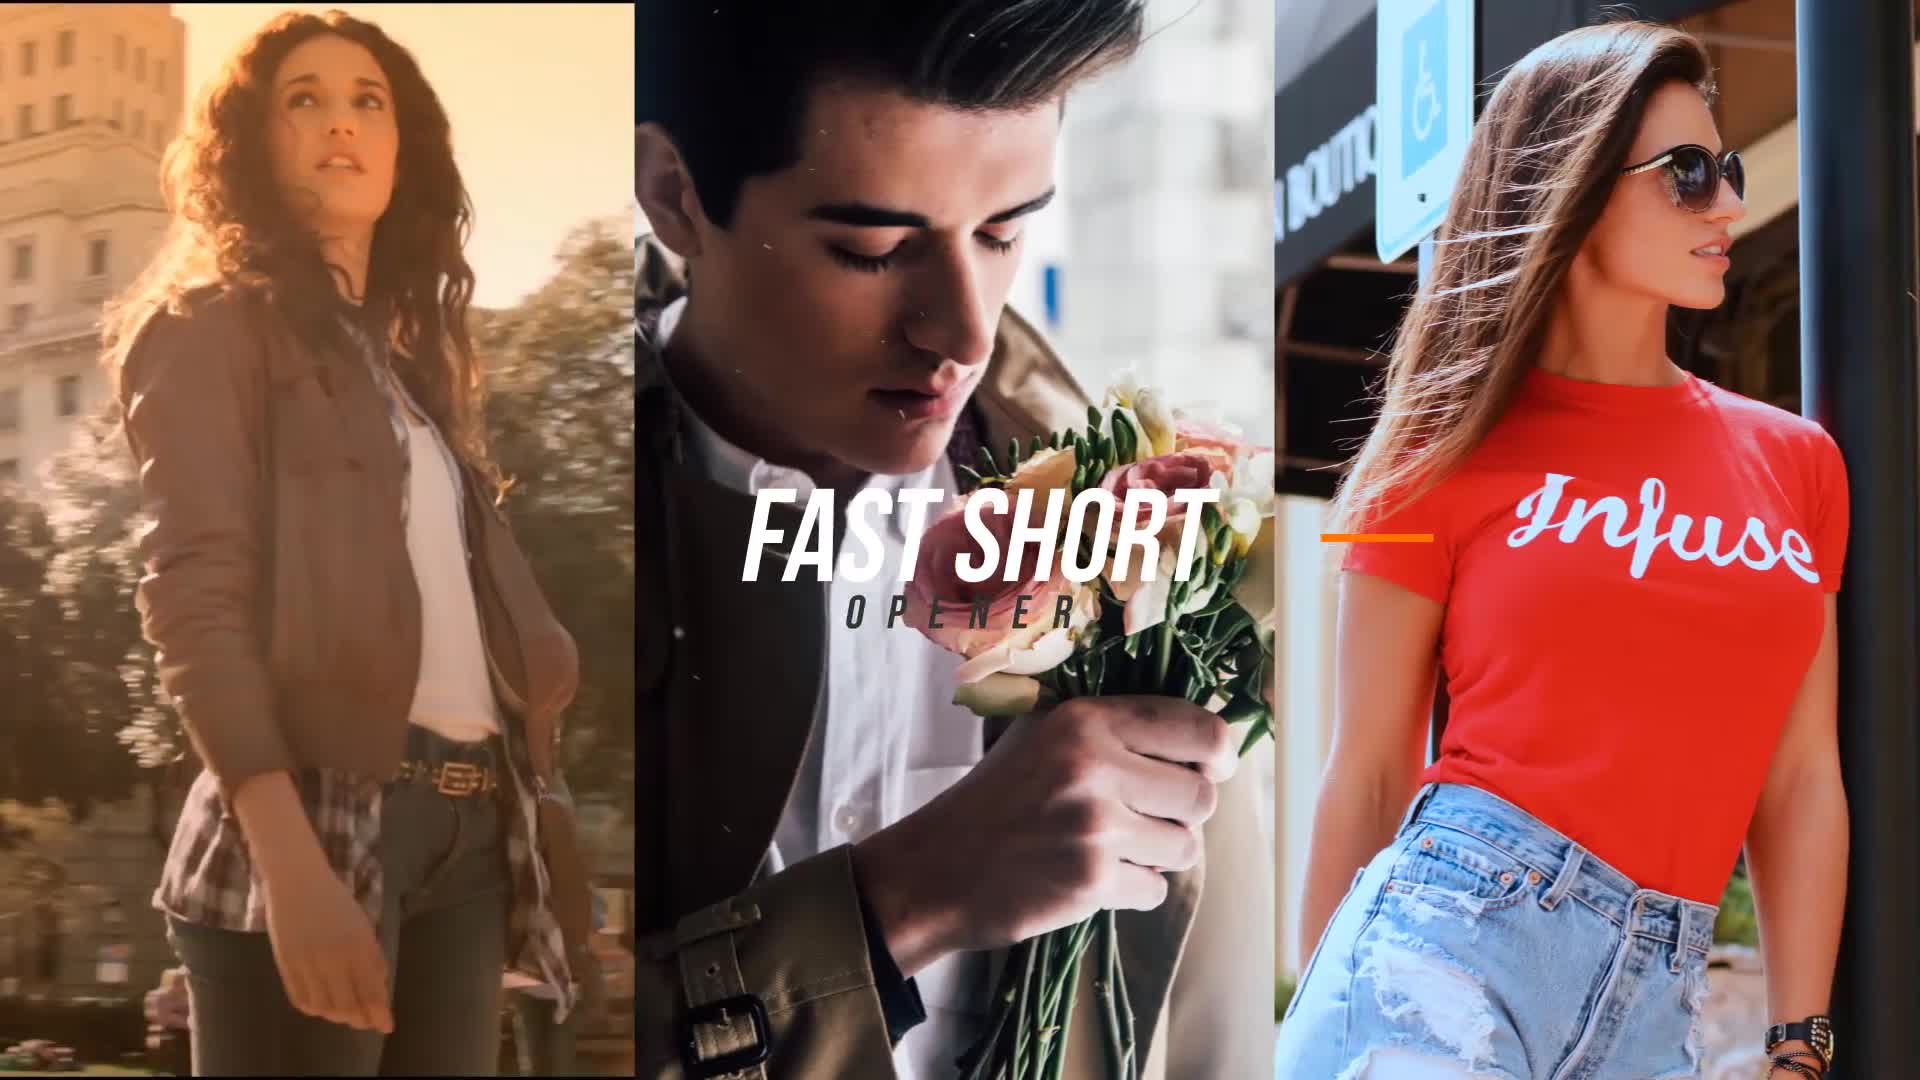 Fast Short Opener - Download Videohive 18774862